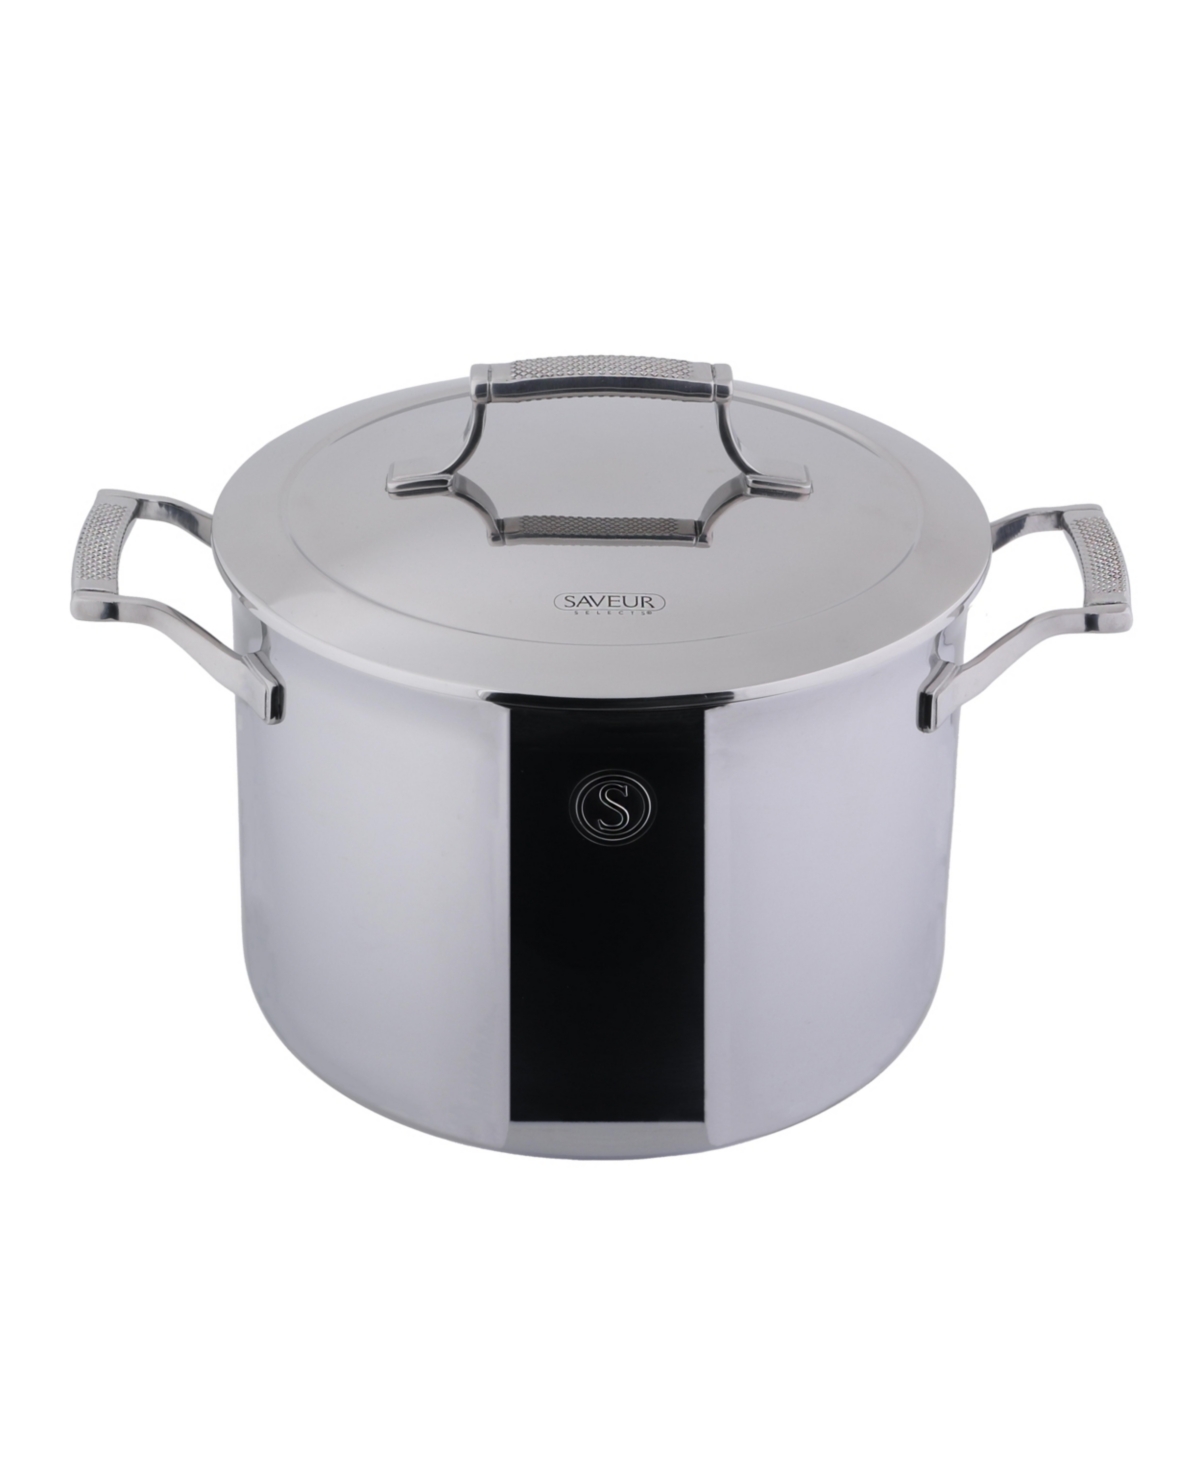 Saveur Selects Voyage Series Tri-ply Stainless Steel 8-qt. Stockpot In Silver